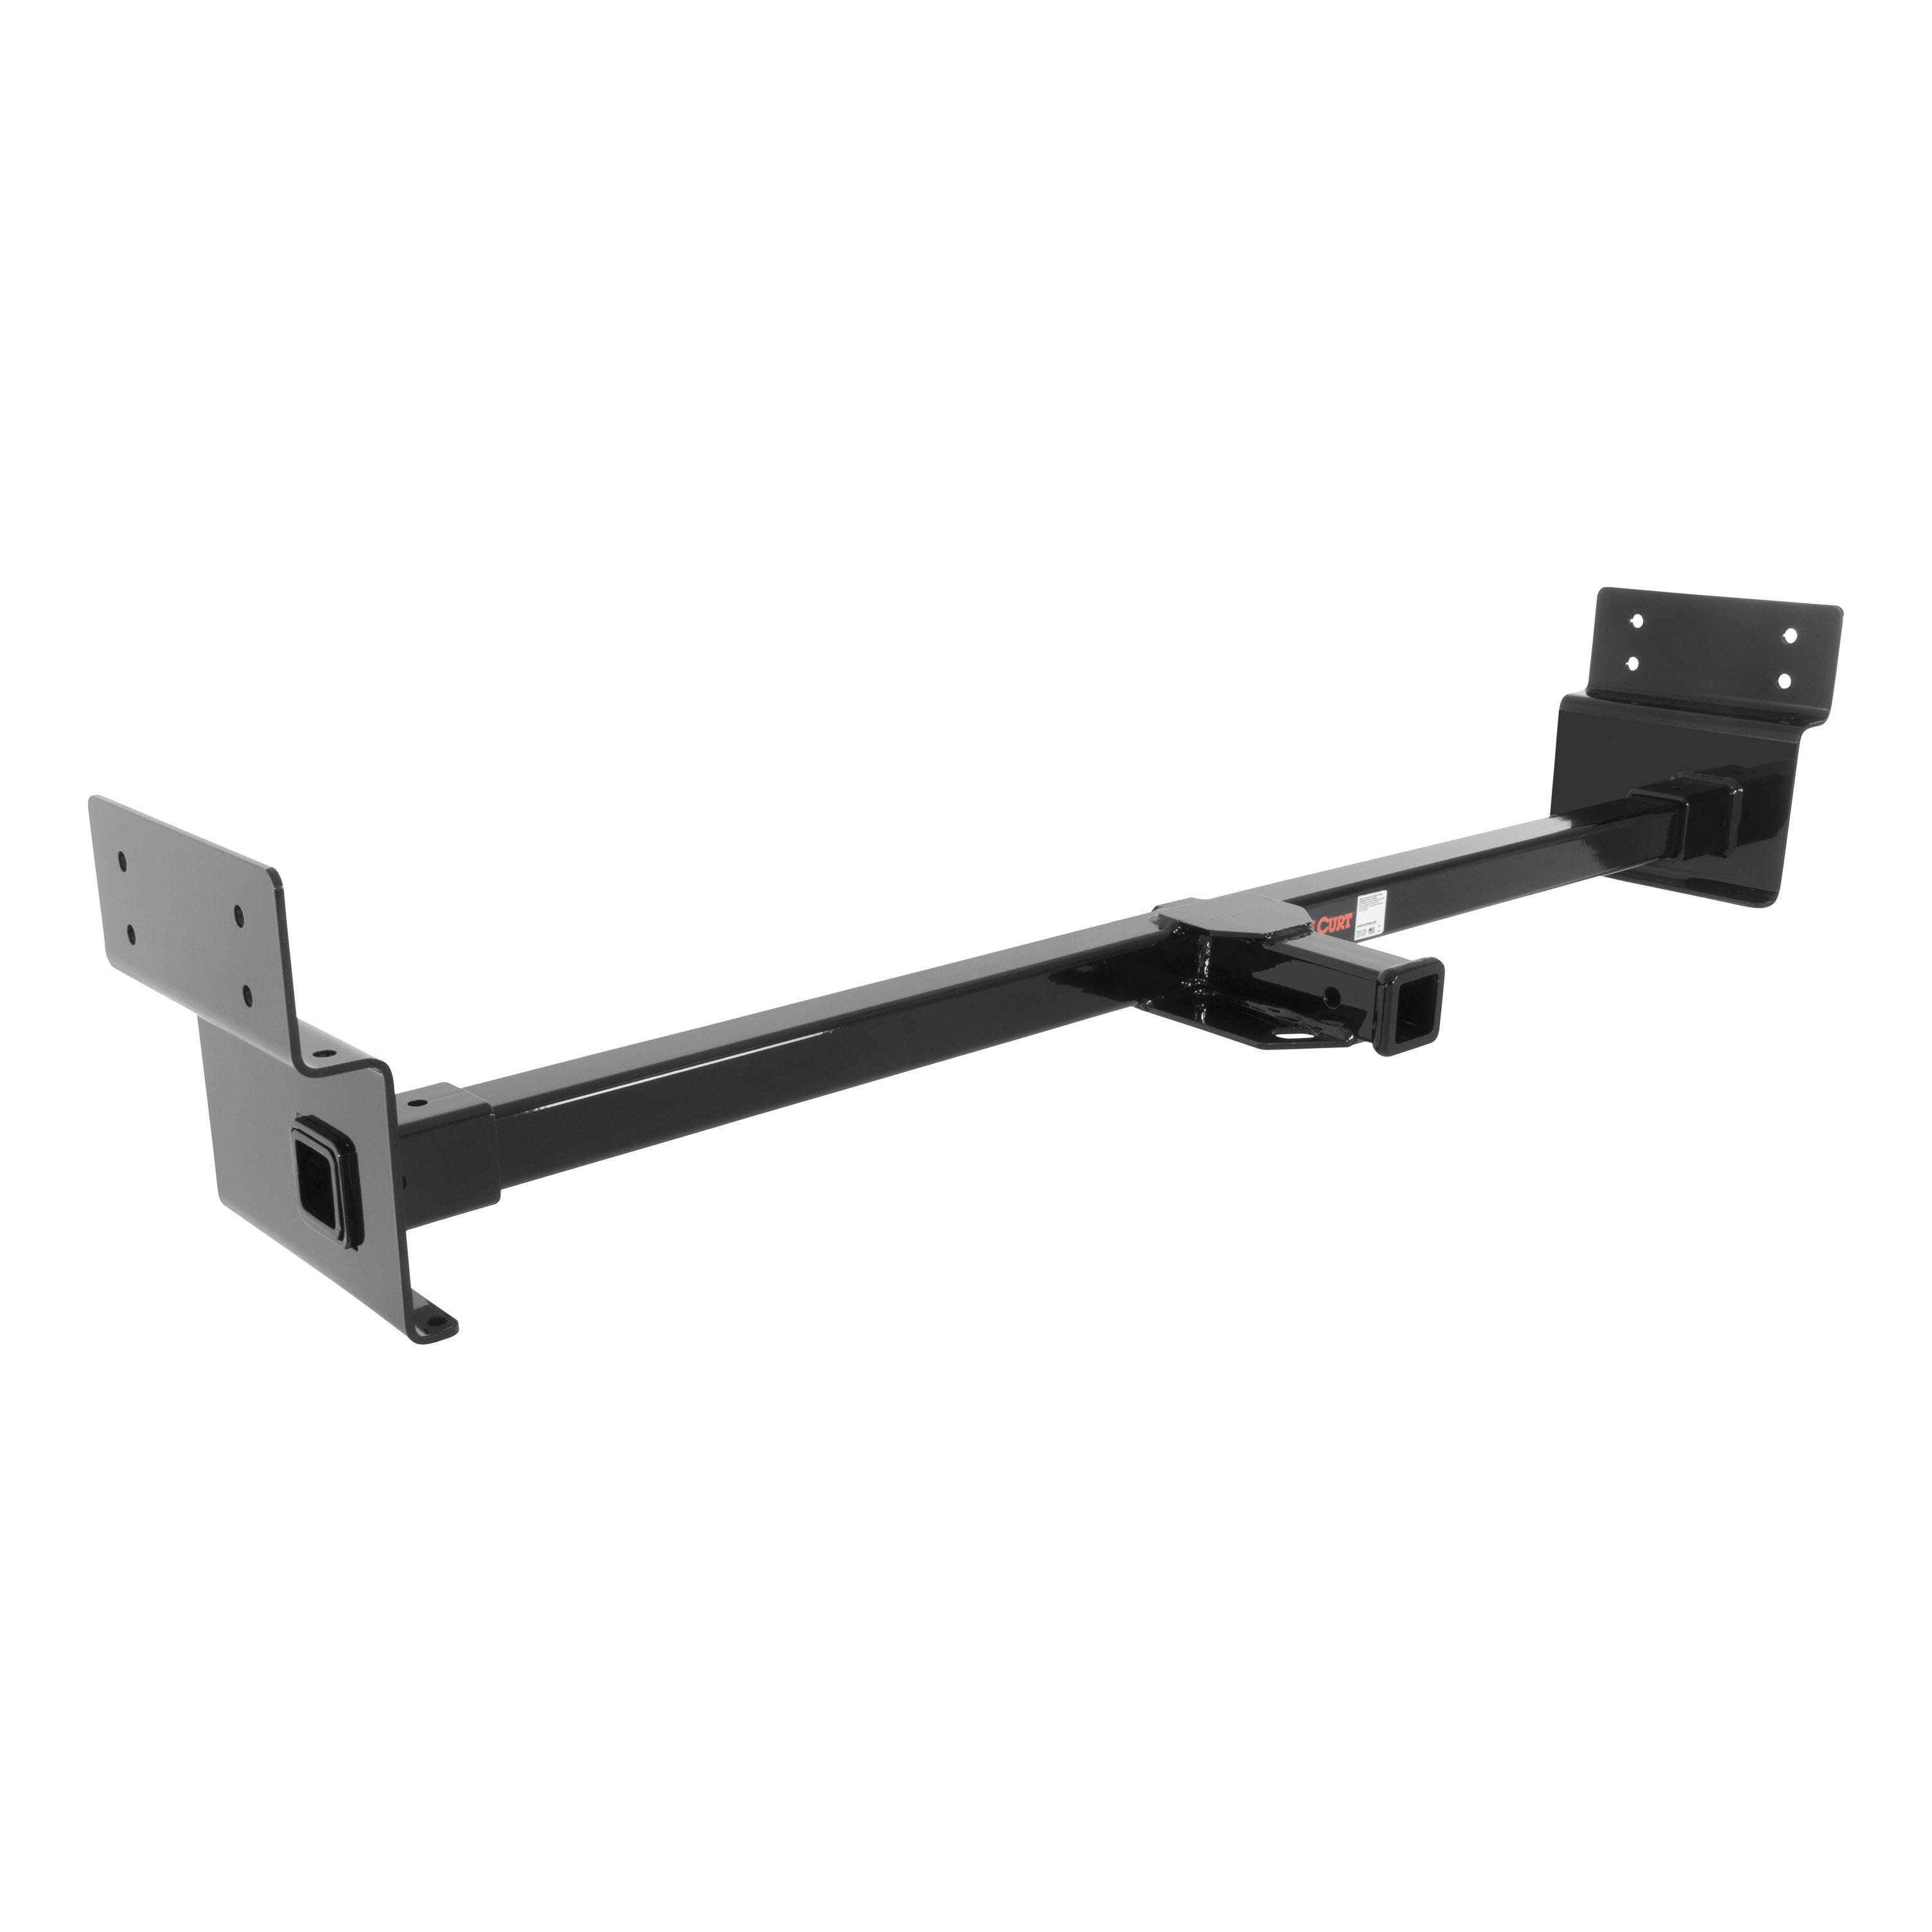 CURT 13703 Adjustable RV Trailer Hitch, 2 Receiver (Up to 72 Frames)